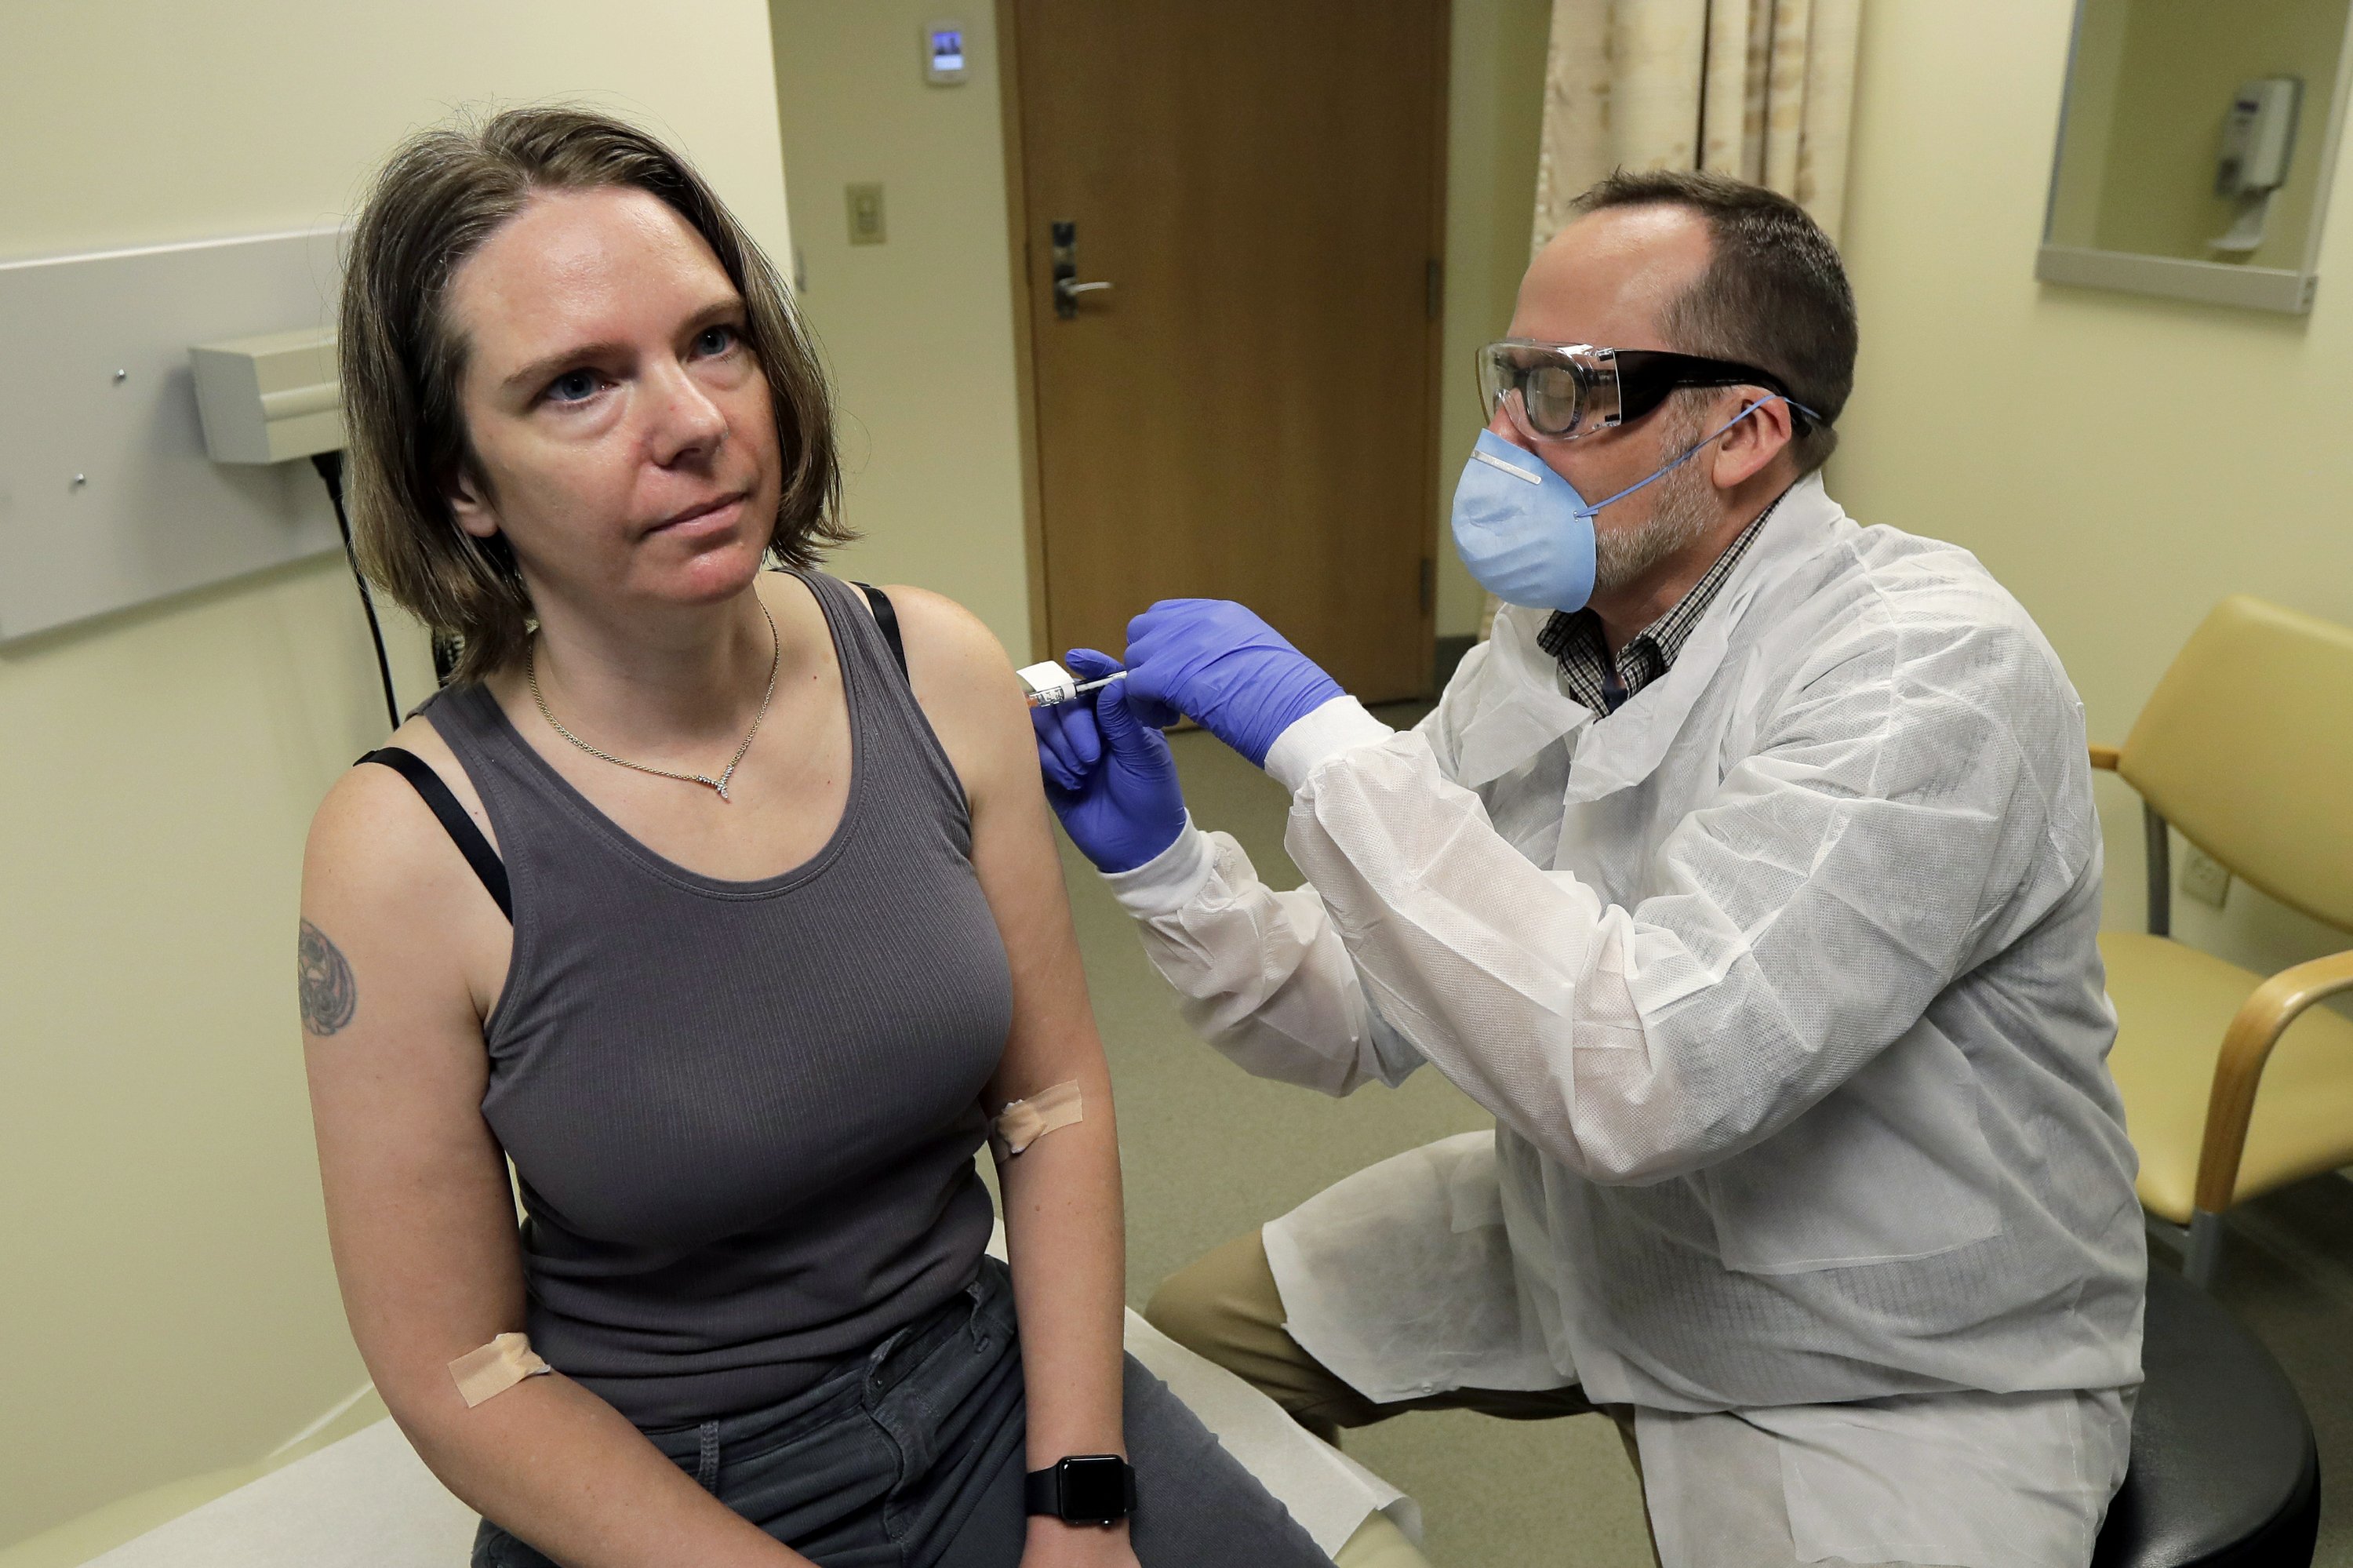 EXPLAINER: Should vaccine volunteers now get the real thing? - The Associated Press